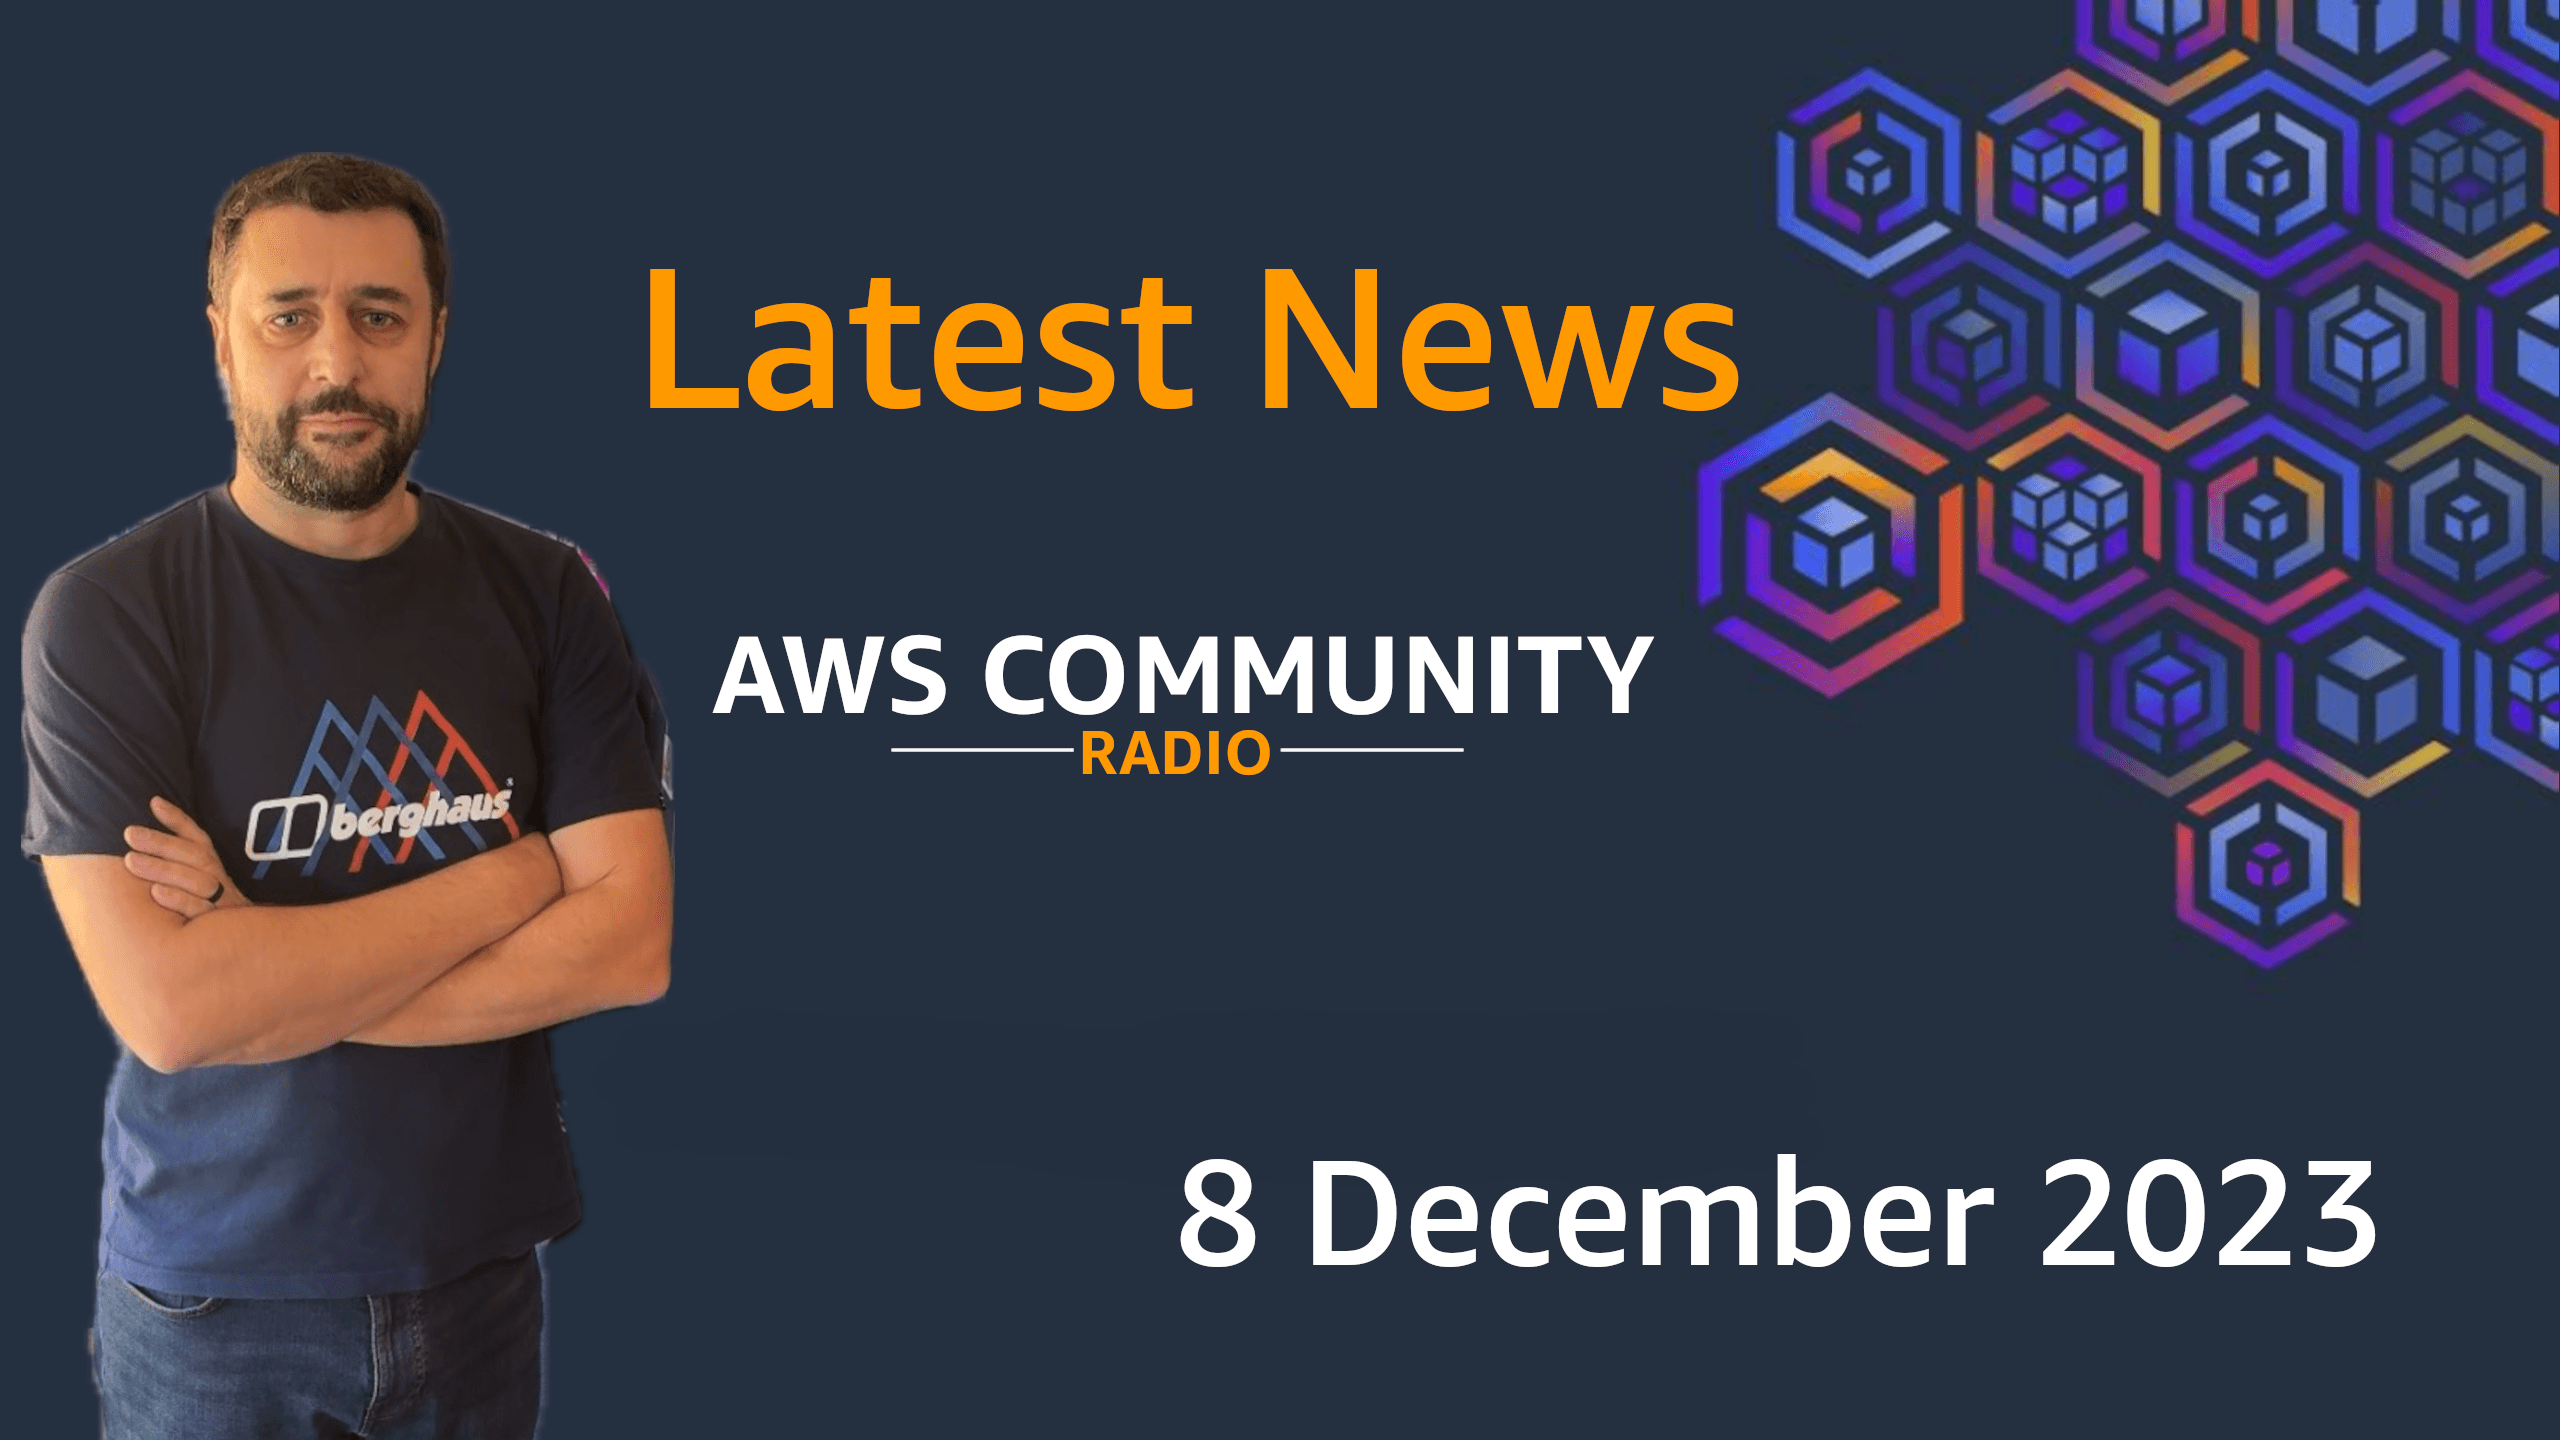 Check out the latest updates from AWS